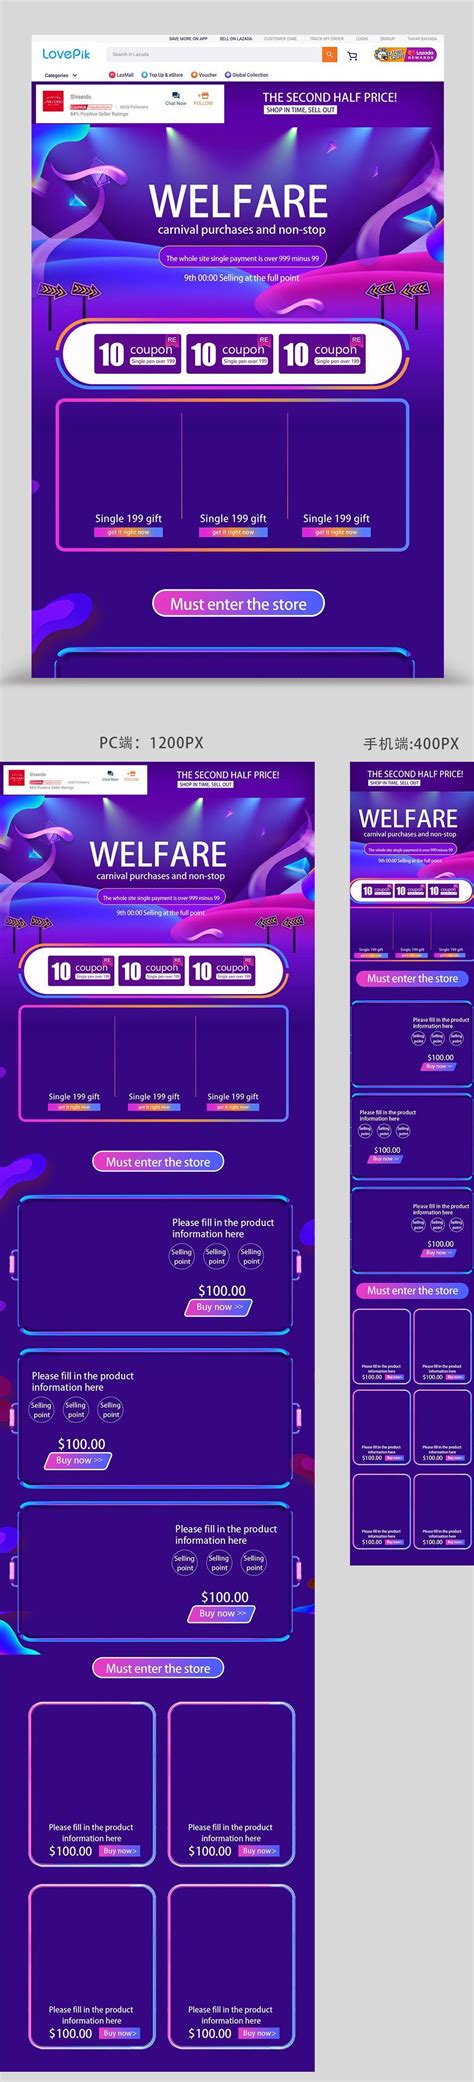 Lazada Gradient Background Holiday Promotion Home Template Image